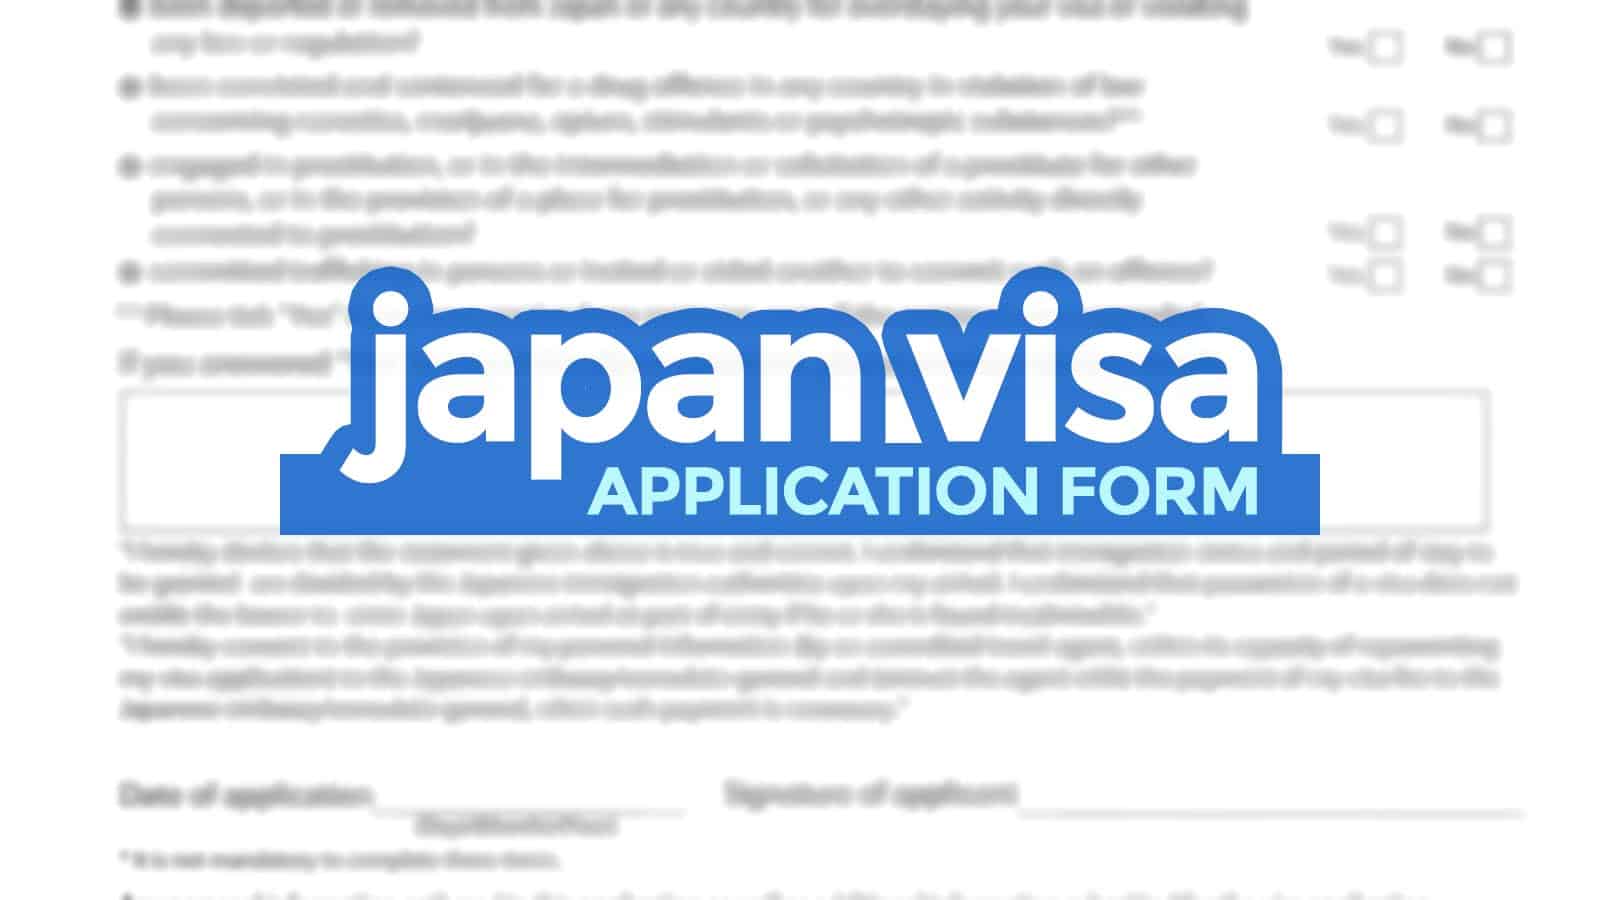 JAPAN VISA APPLICATION FORM: Sample + How to Fill it Out